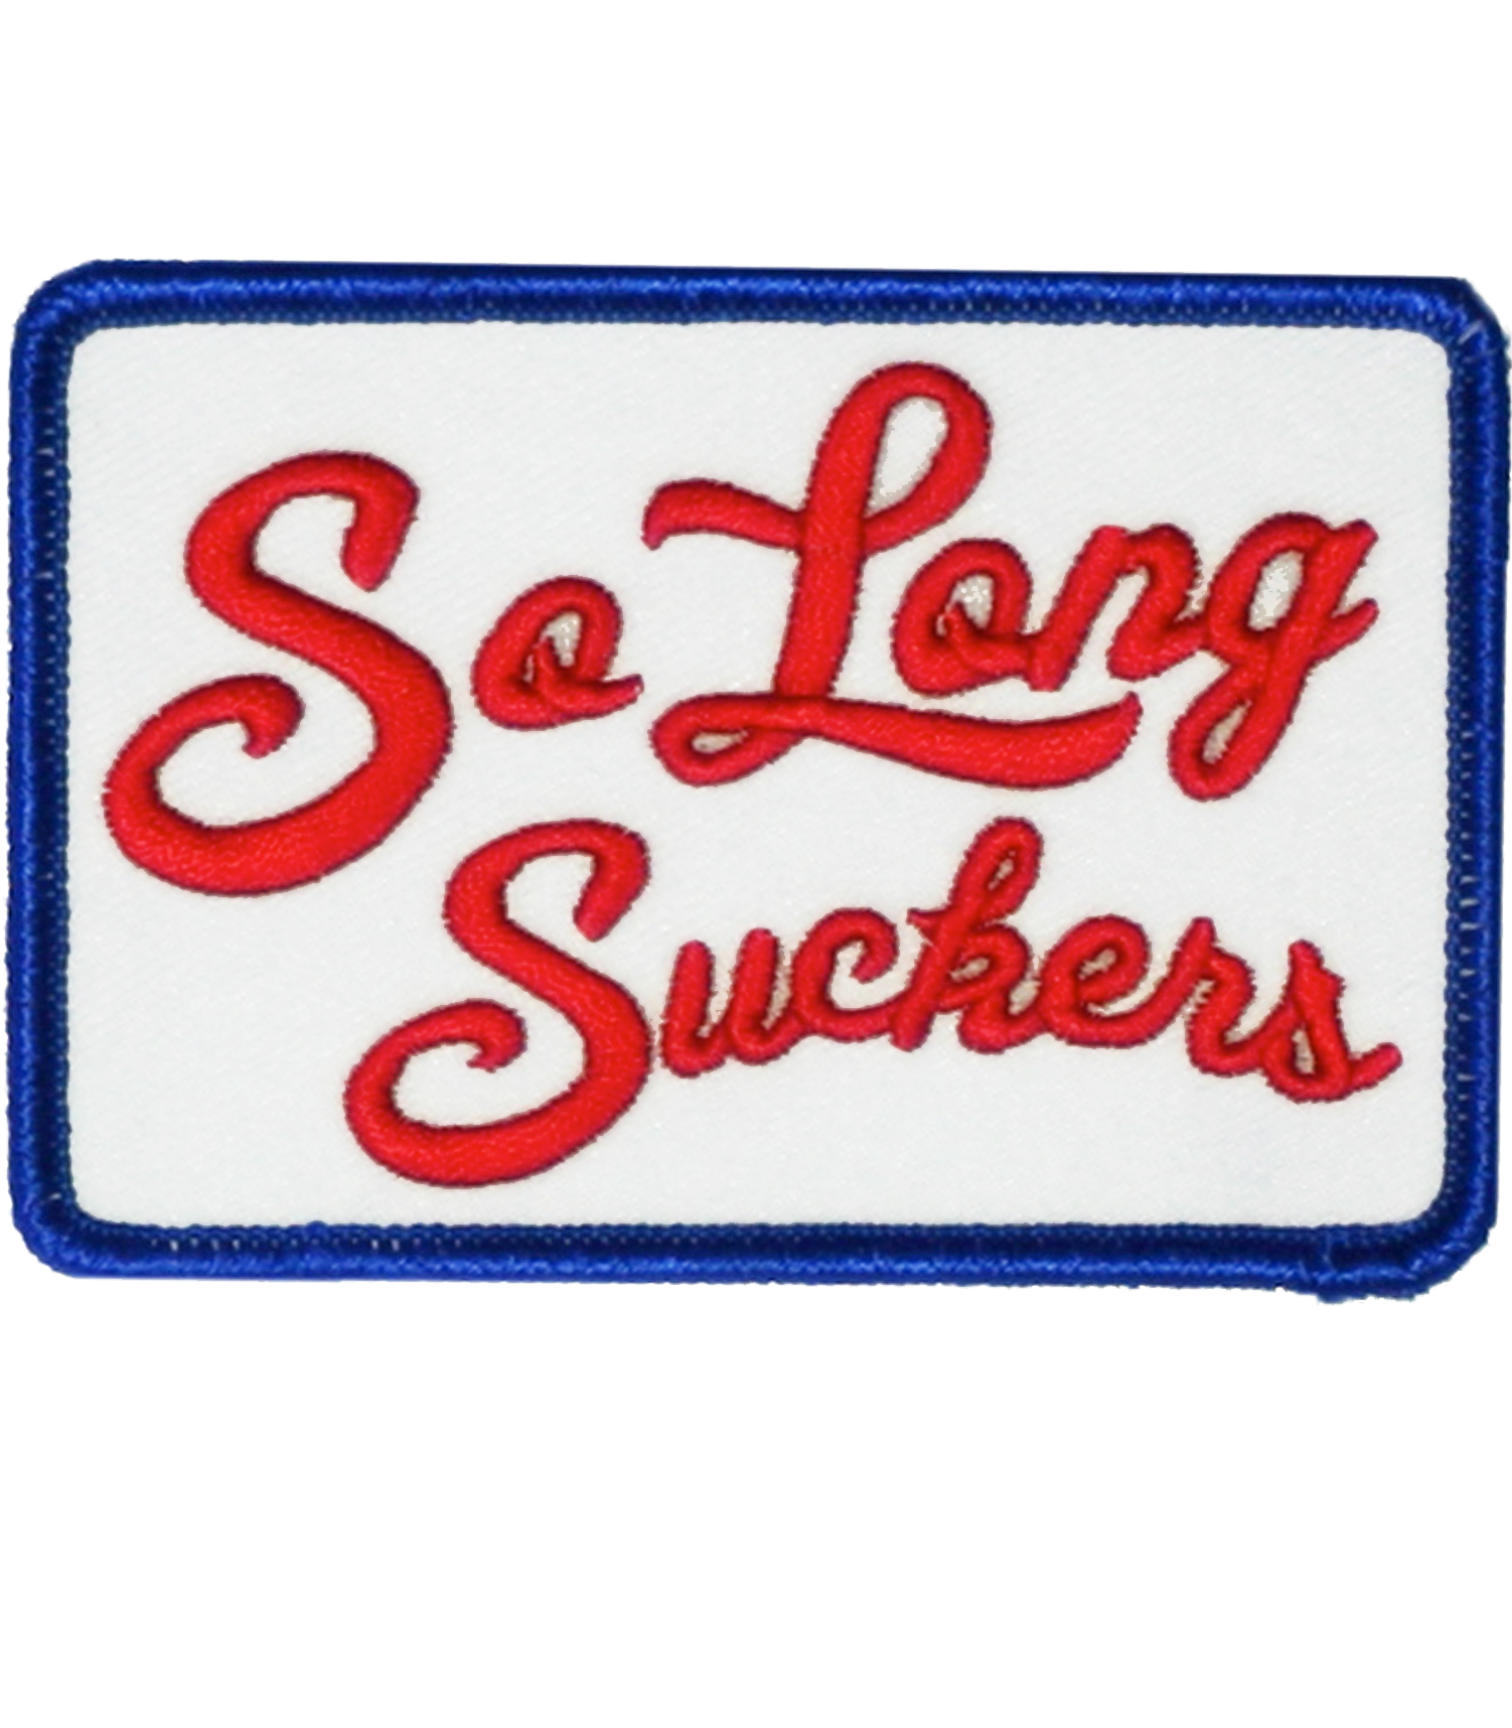 The SO LONG SUCKERS Patch - WHITE/RED/BLUE